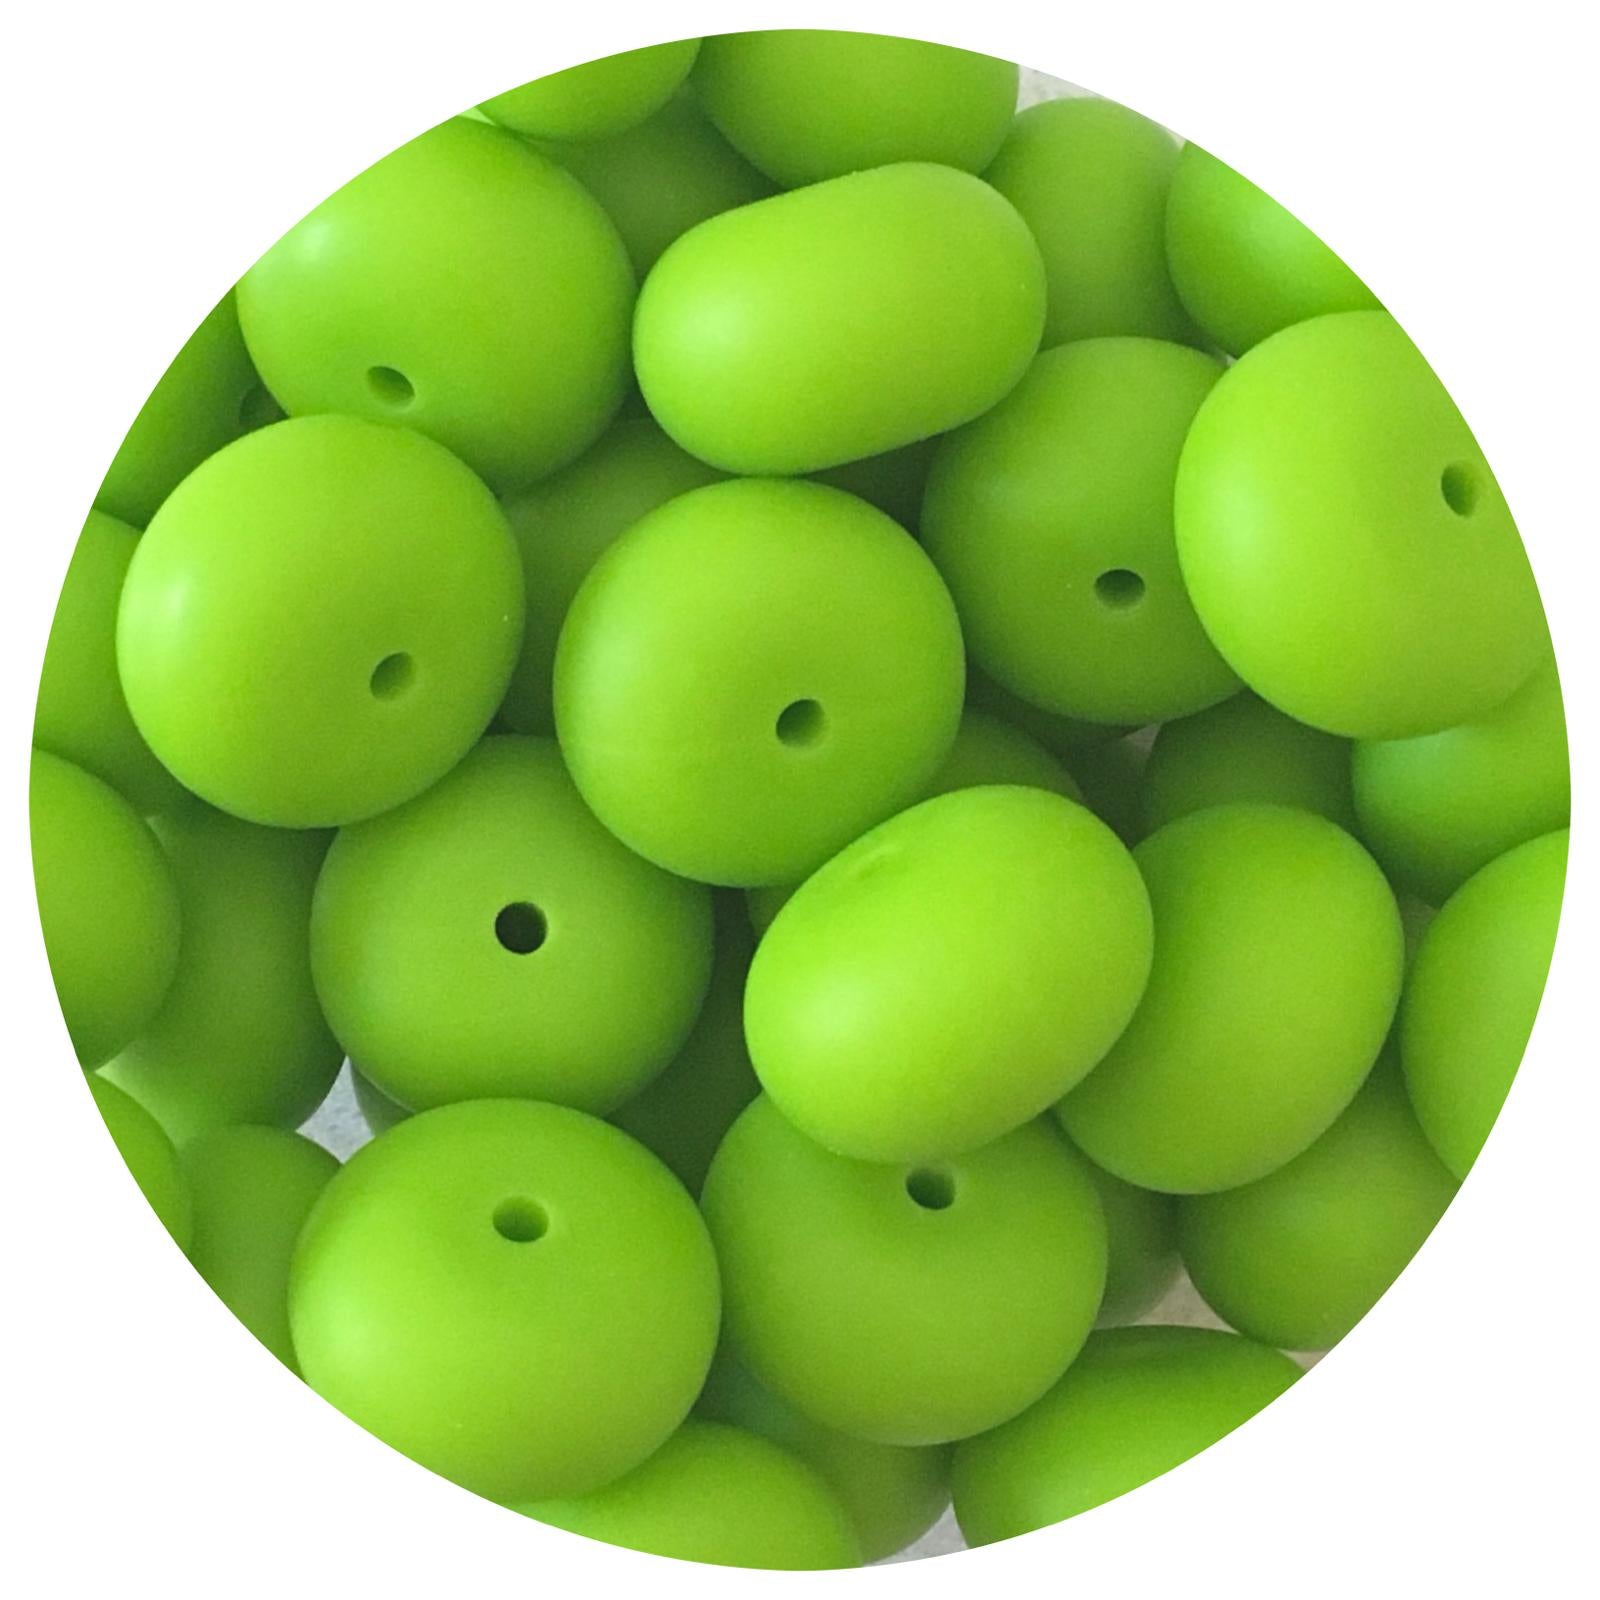 Key Lime Green - 22mm Abacus Silicone Beads - 5 Beads